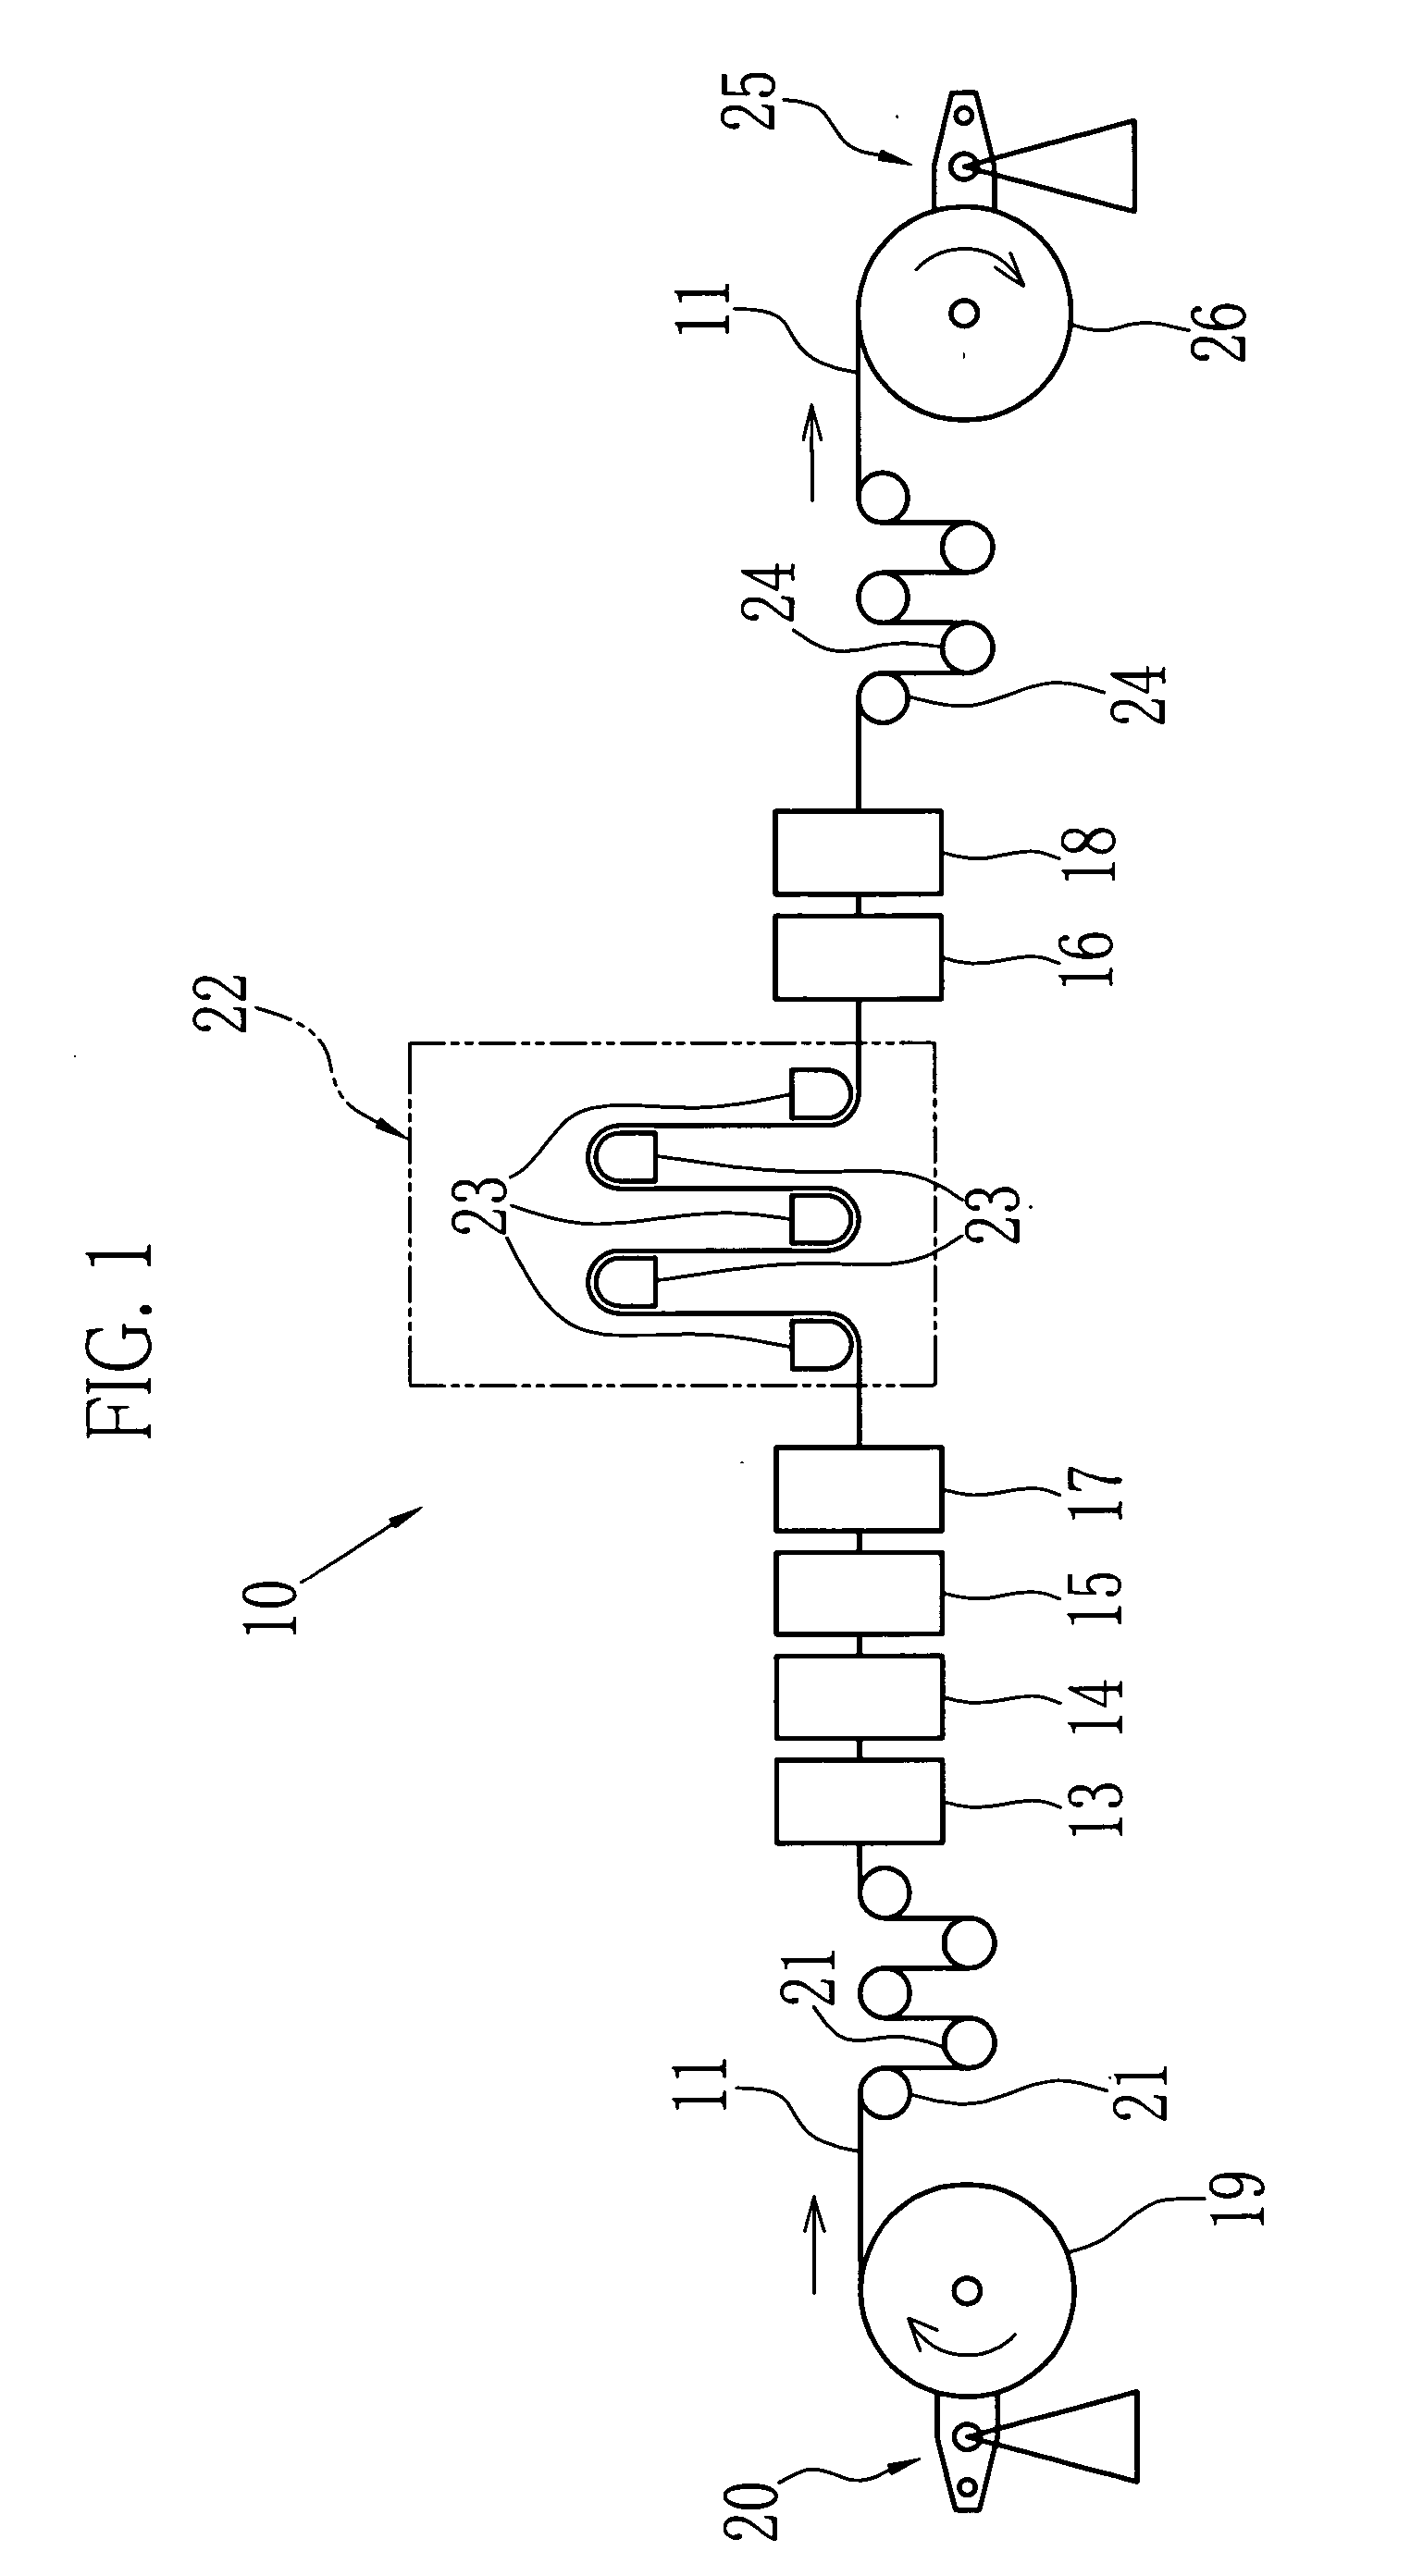 Noncontact web transporting method and apparatus